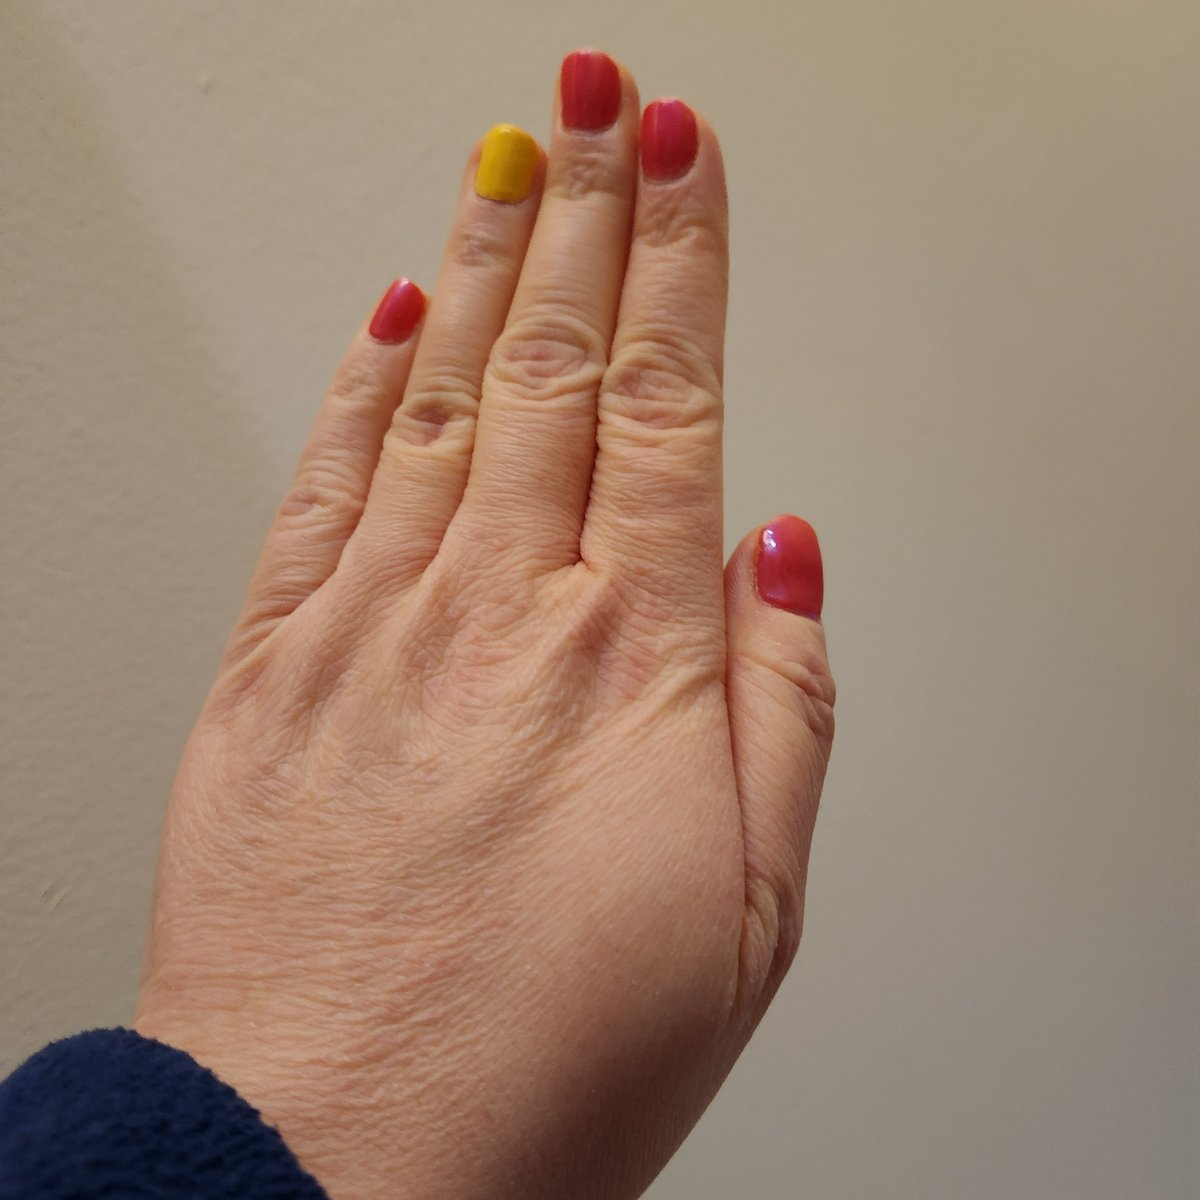 I have a fingernail painted yellow on each hand. Here's why: m.jpost.com/opinion/articl…

@Hadassah #BringThemHomeNow #EndTheSilence